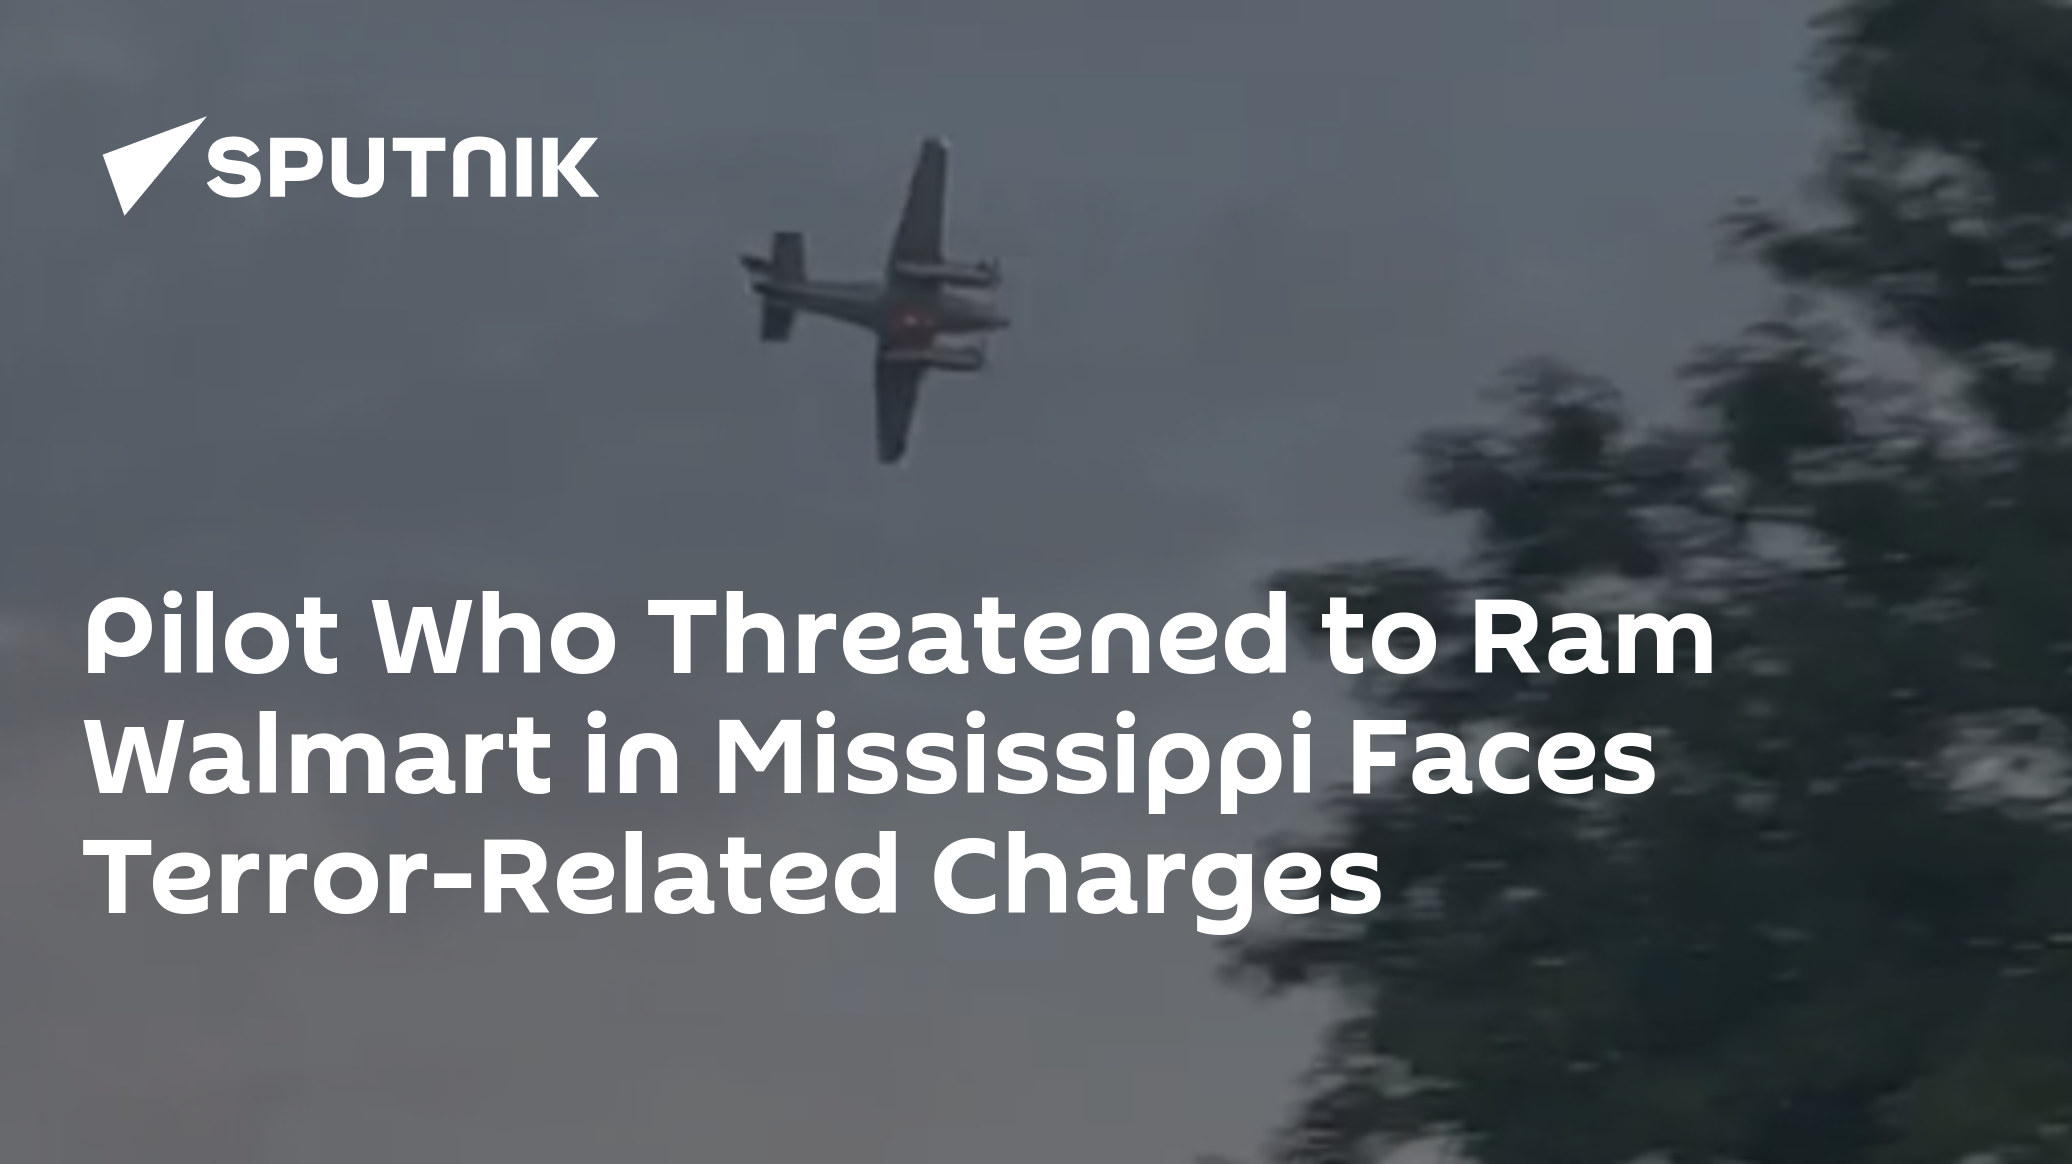 Pilot who threatened to crash plane into Mississippi Walmart faces